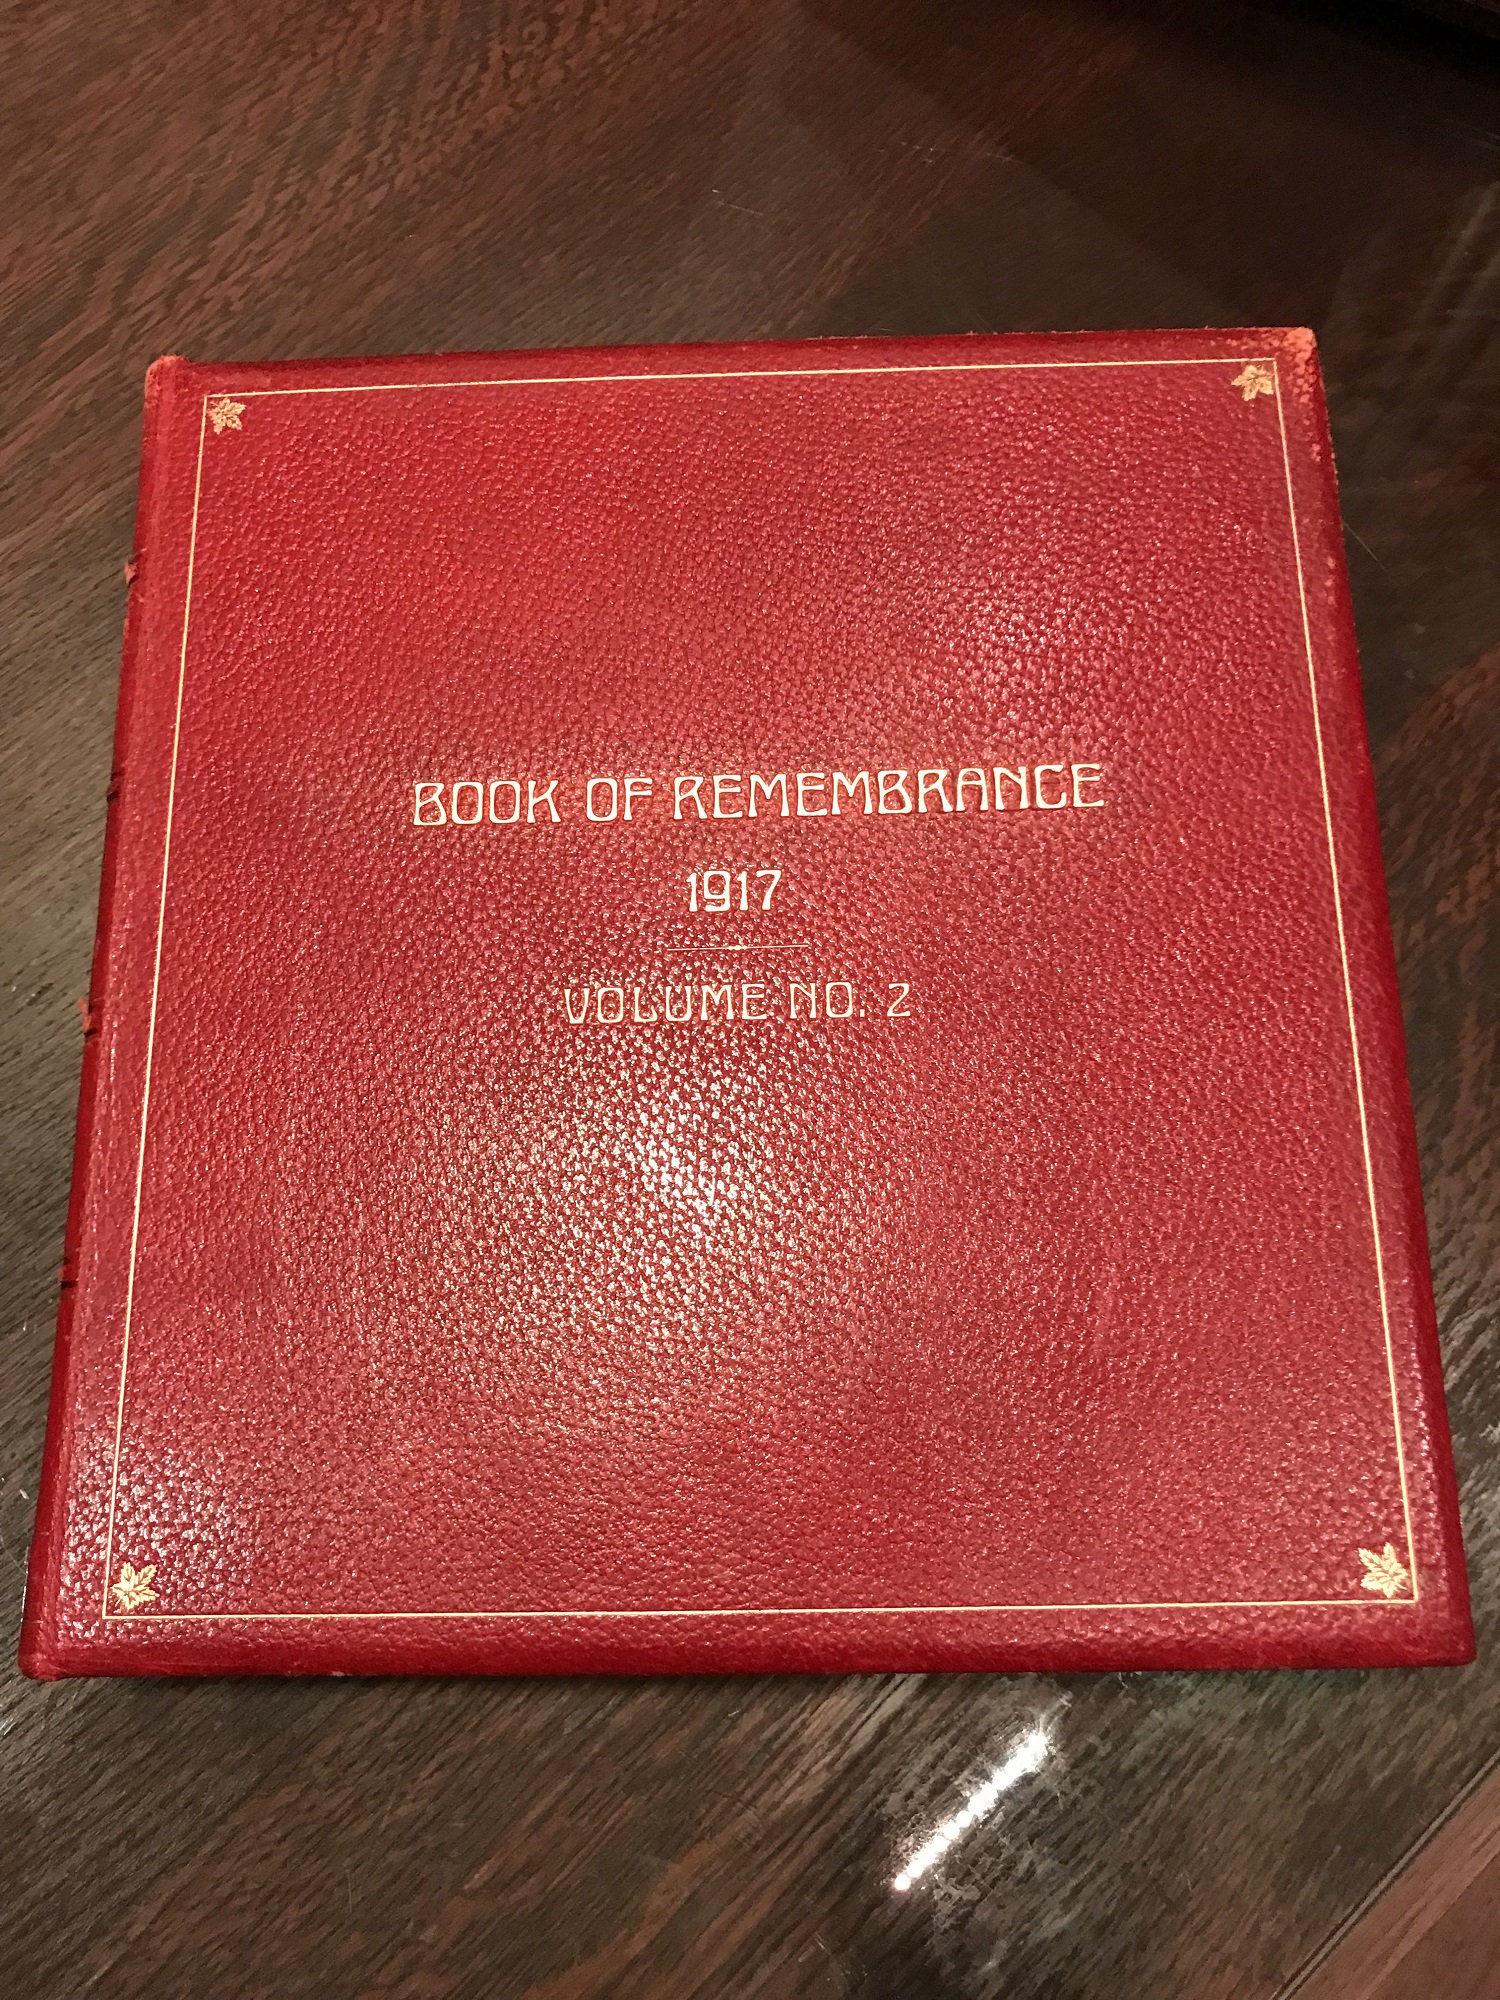 First World War Book of Remembrance, 1917